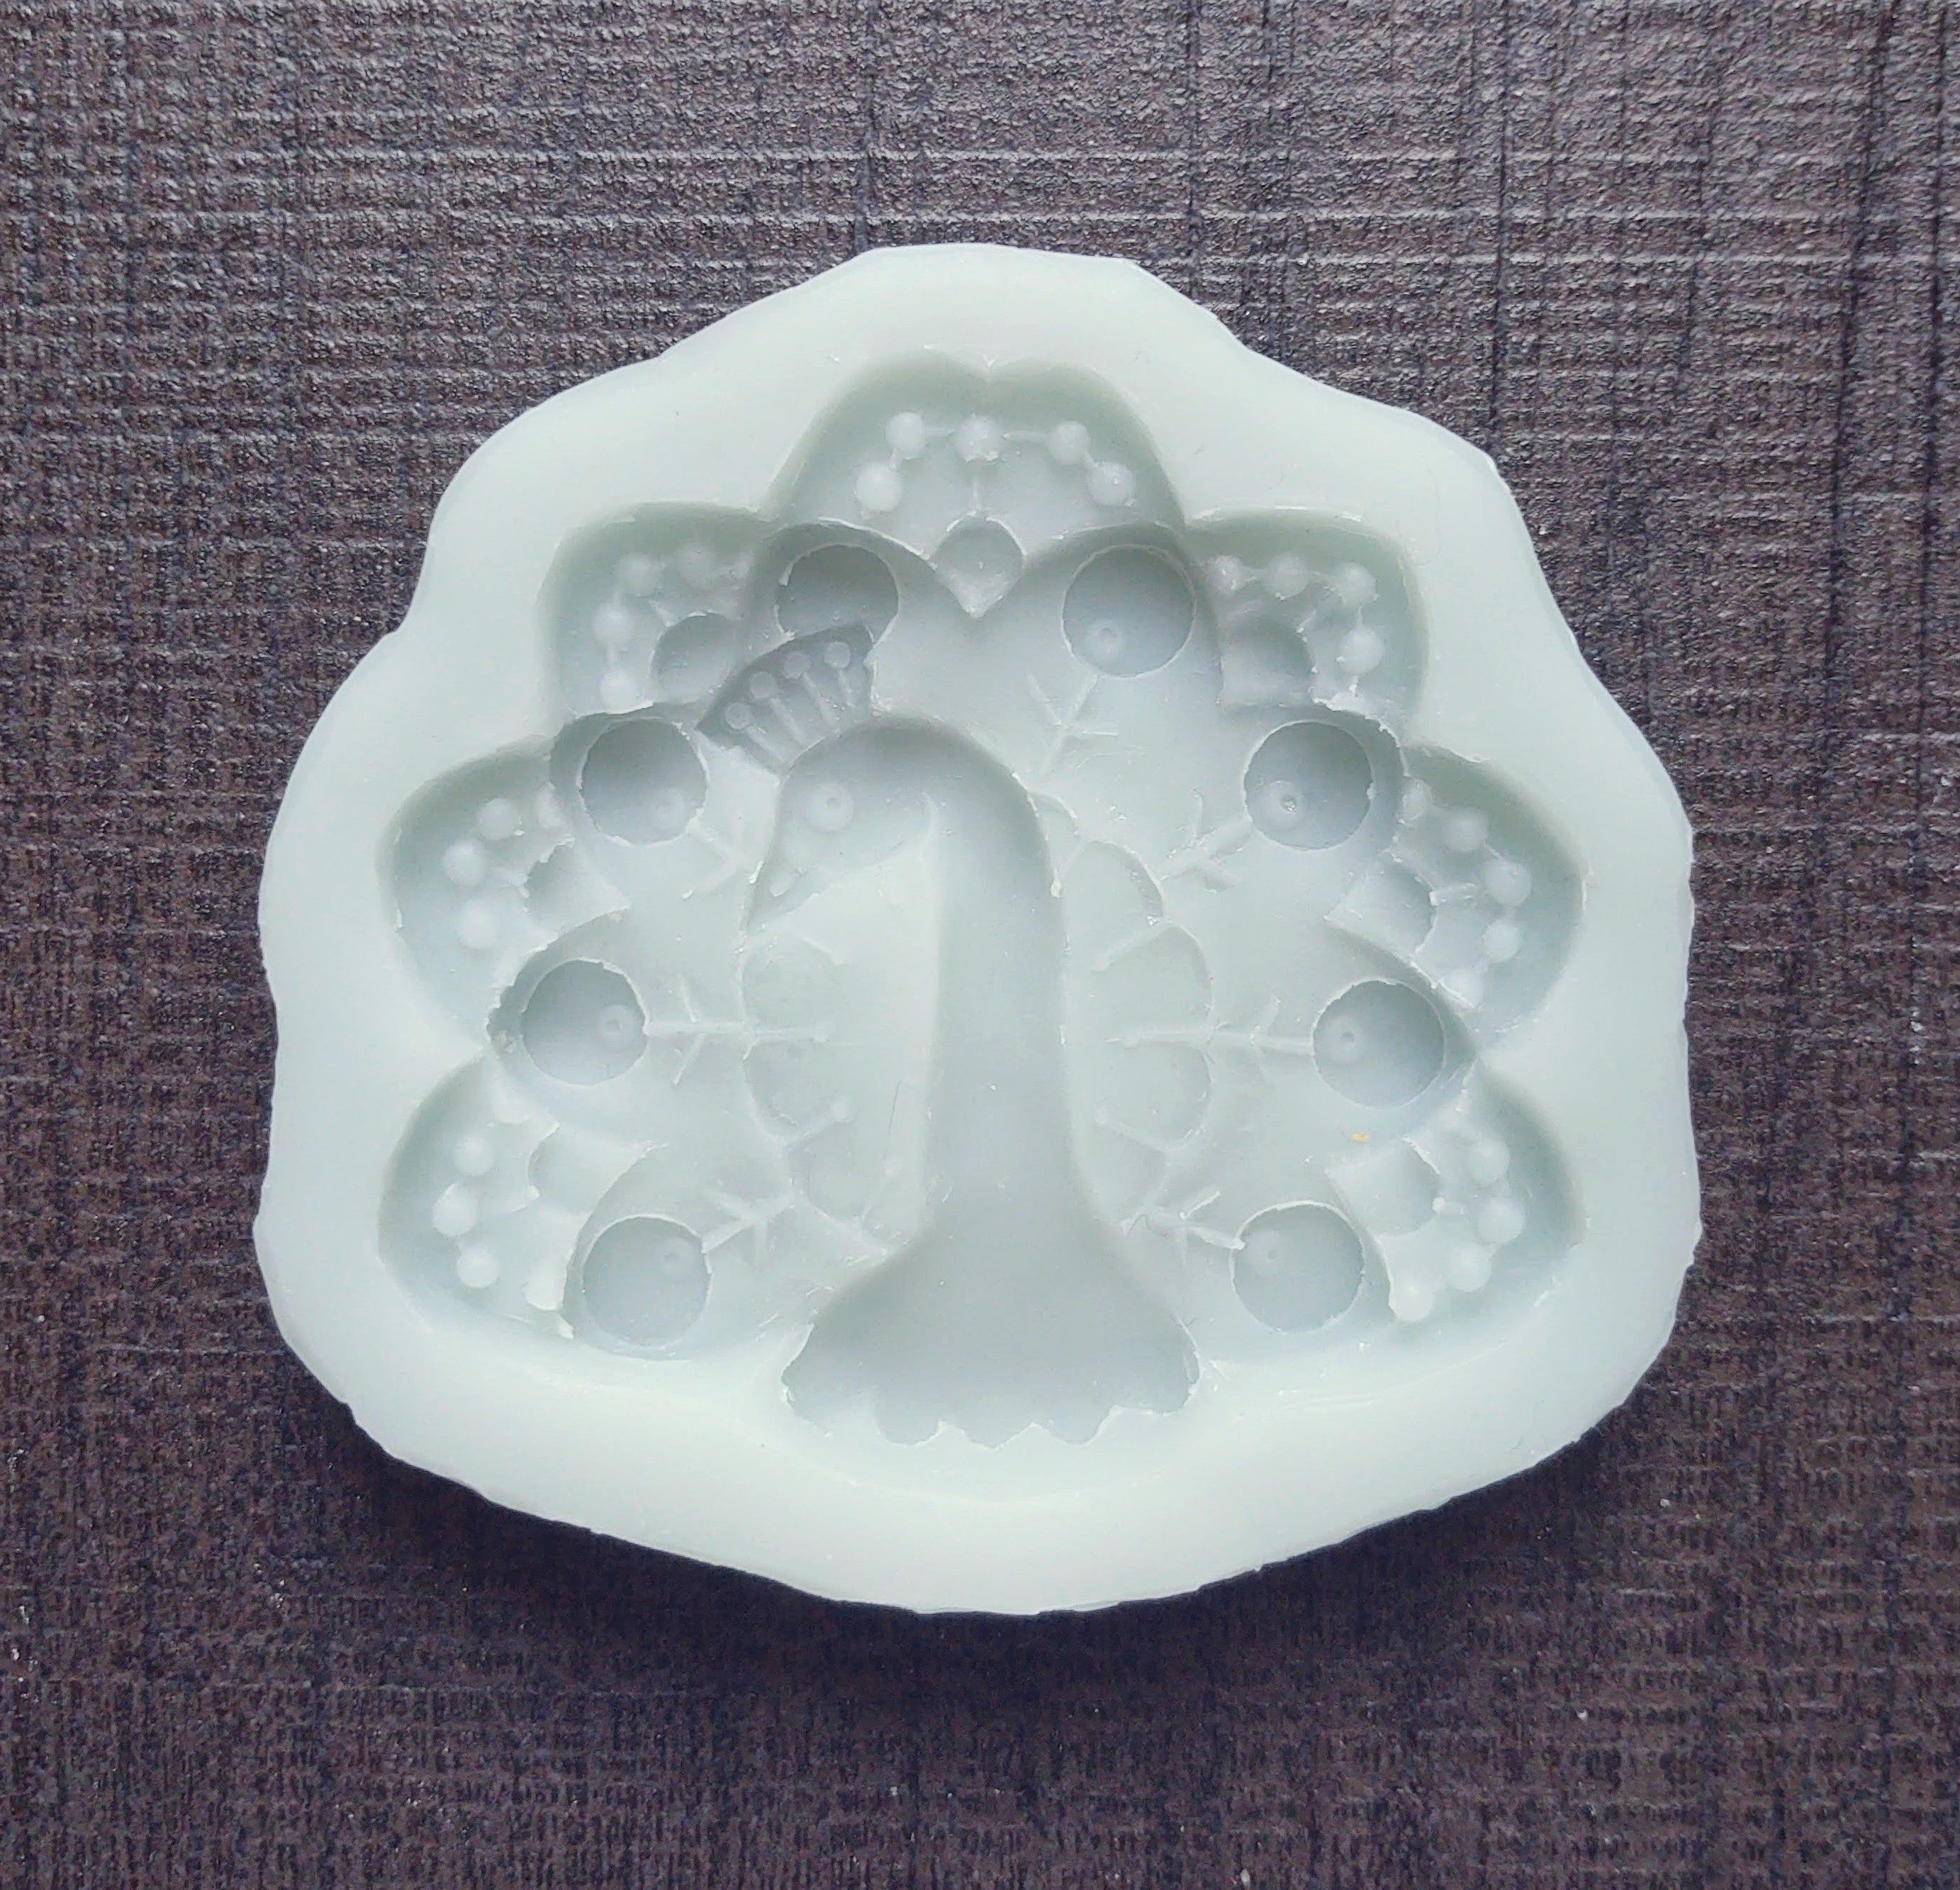 Peacock Silicone Cookie mold